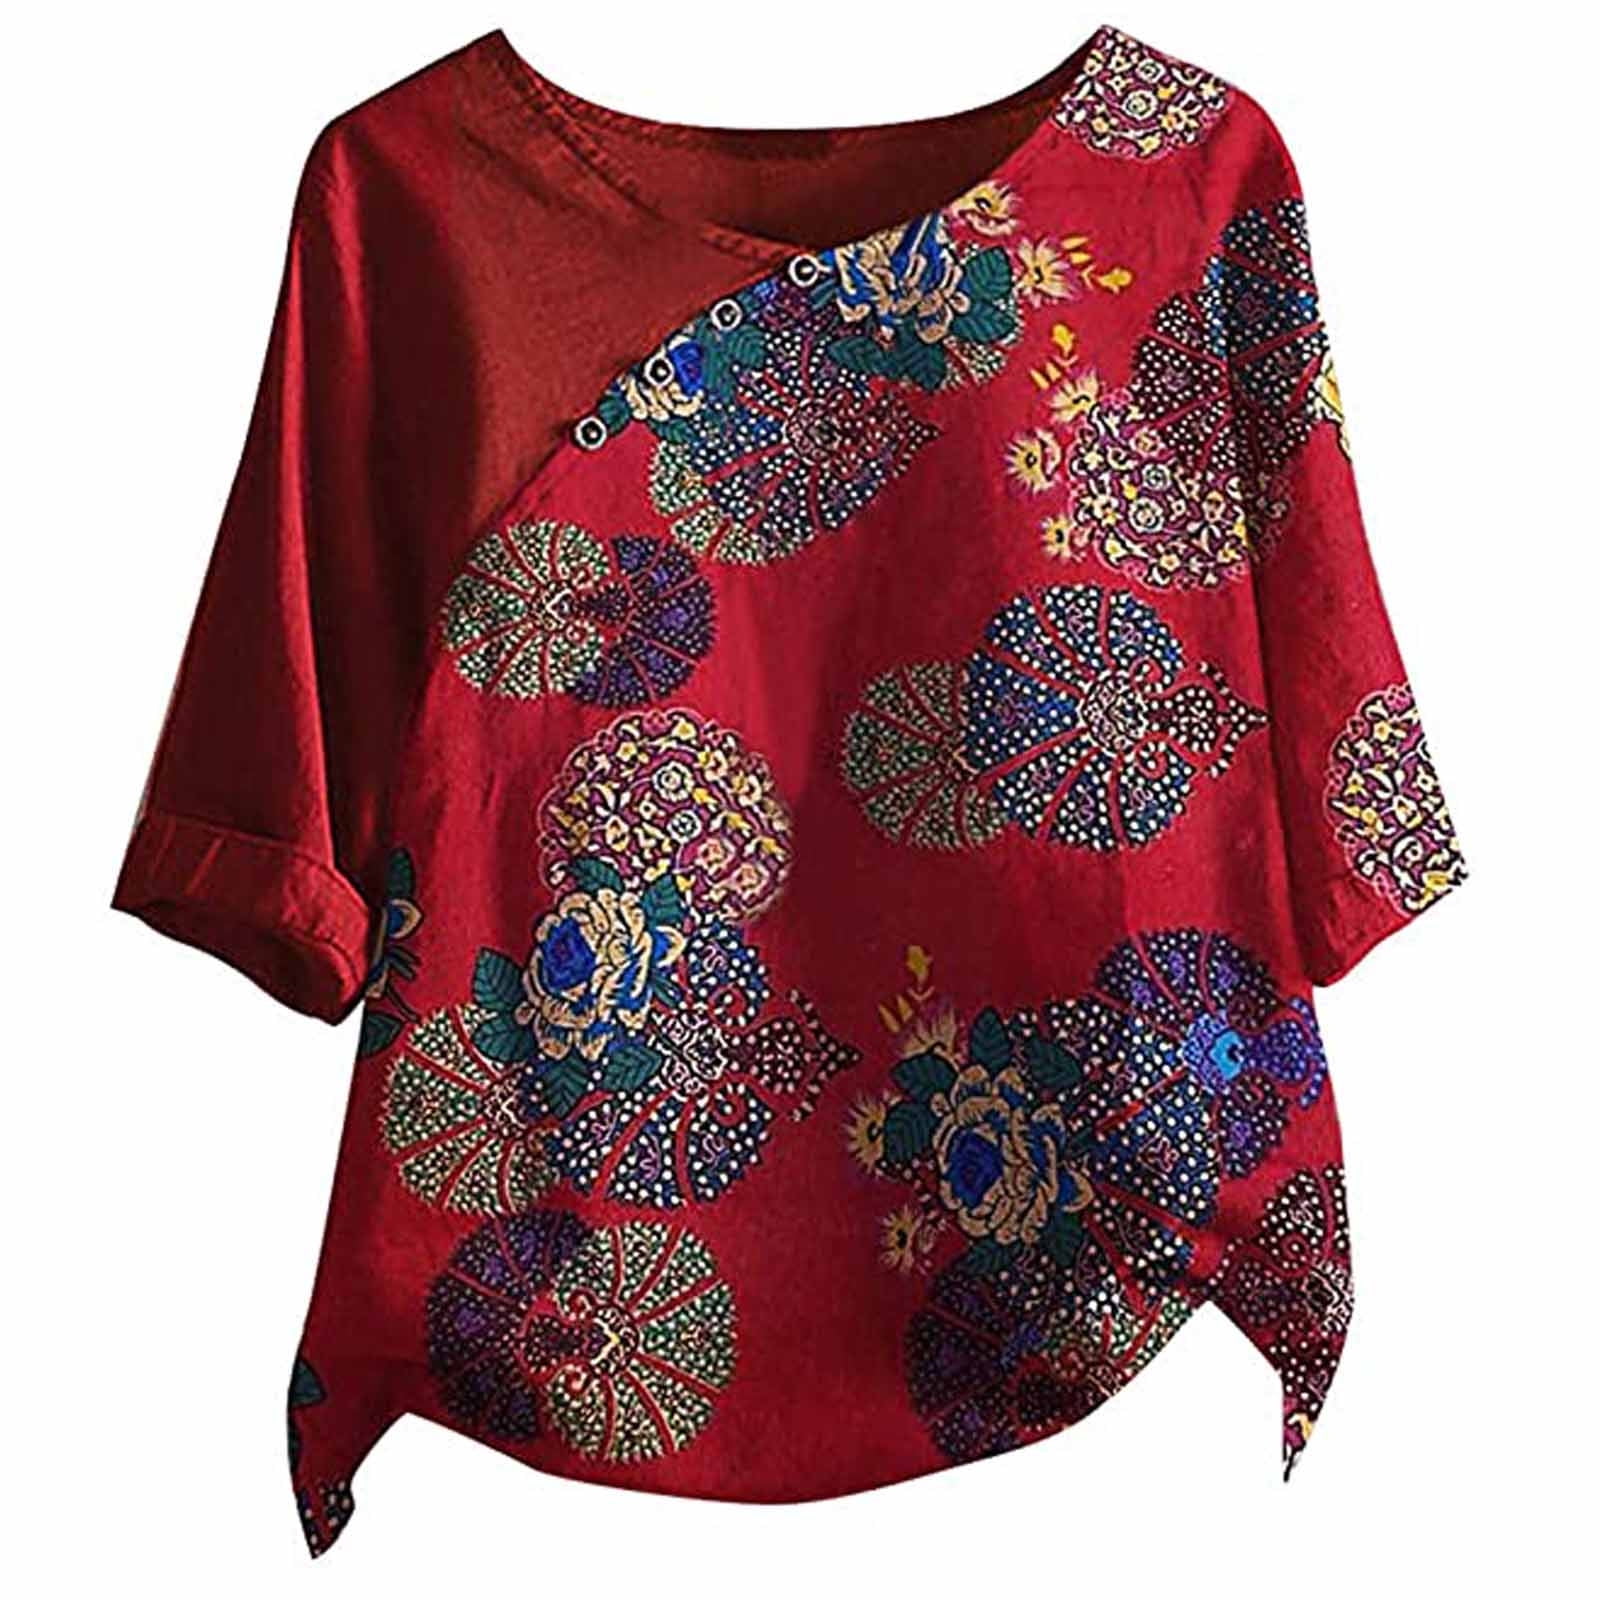 Summer Tops for Women 3/4 Sleeve Blouse Floral Print Plus Size T Shirts ...